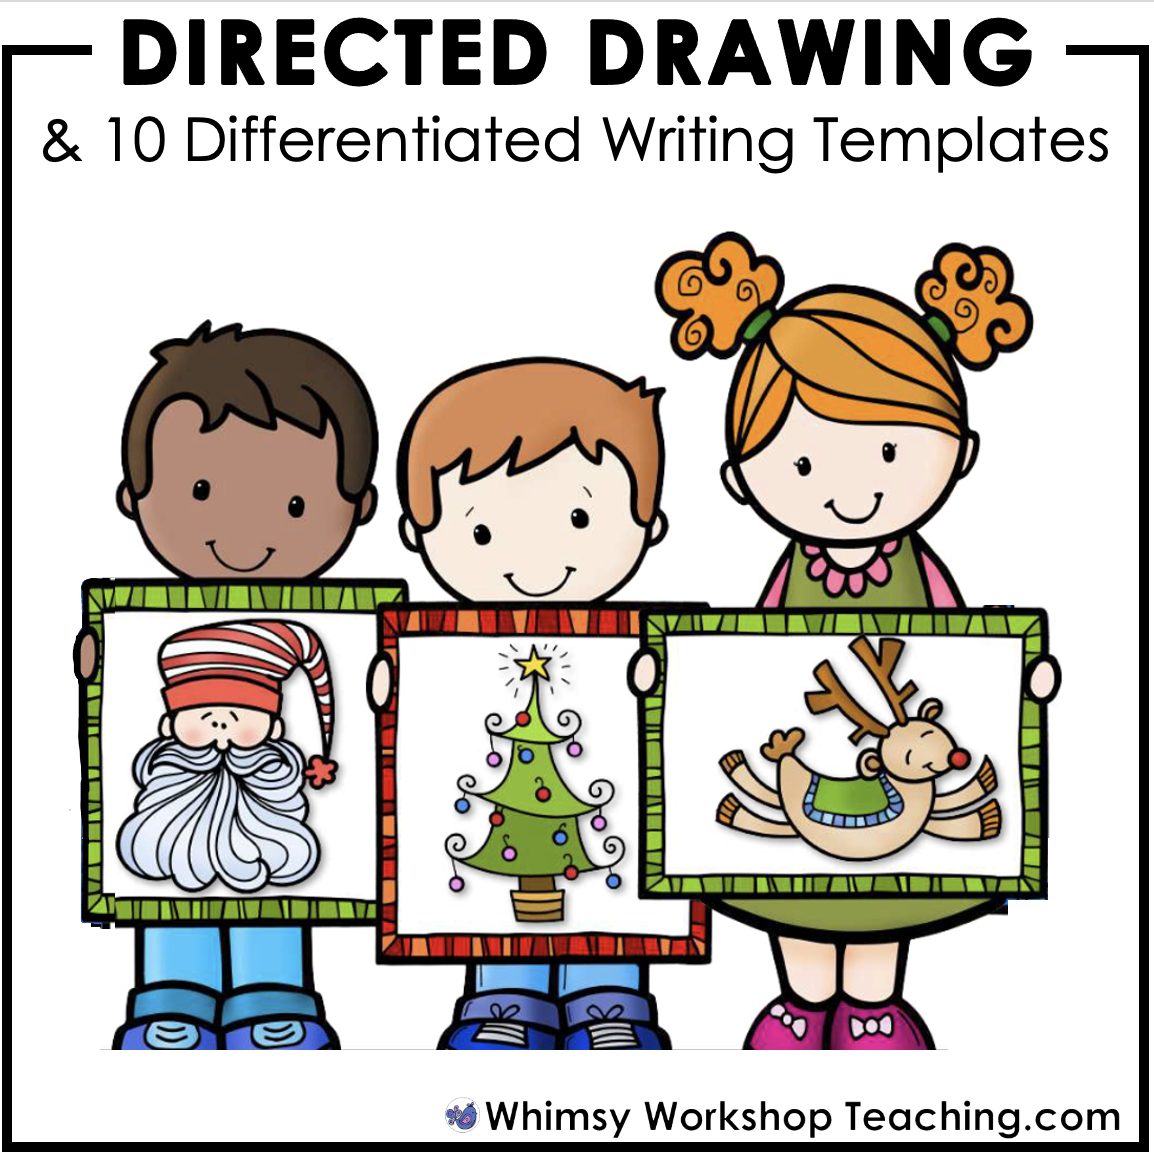 Winter Directed Drawings - Whimsy Workshop Teaching